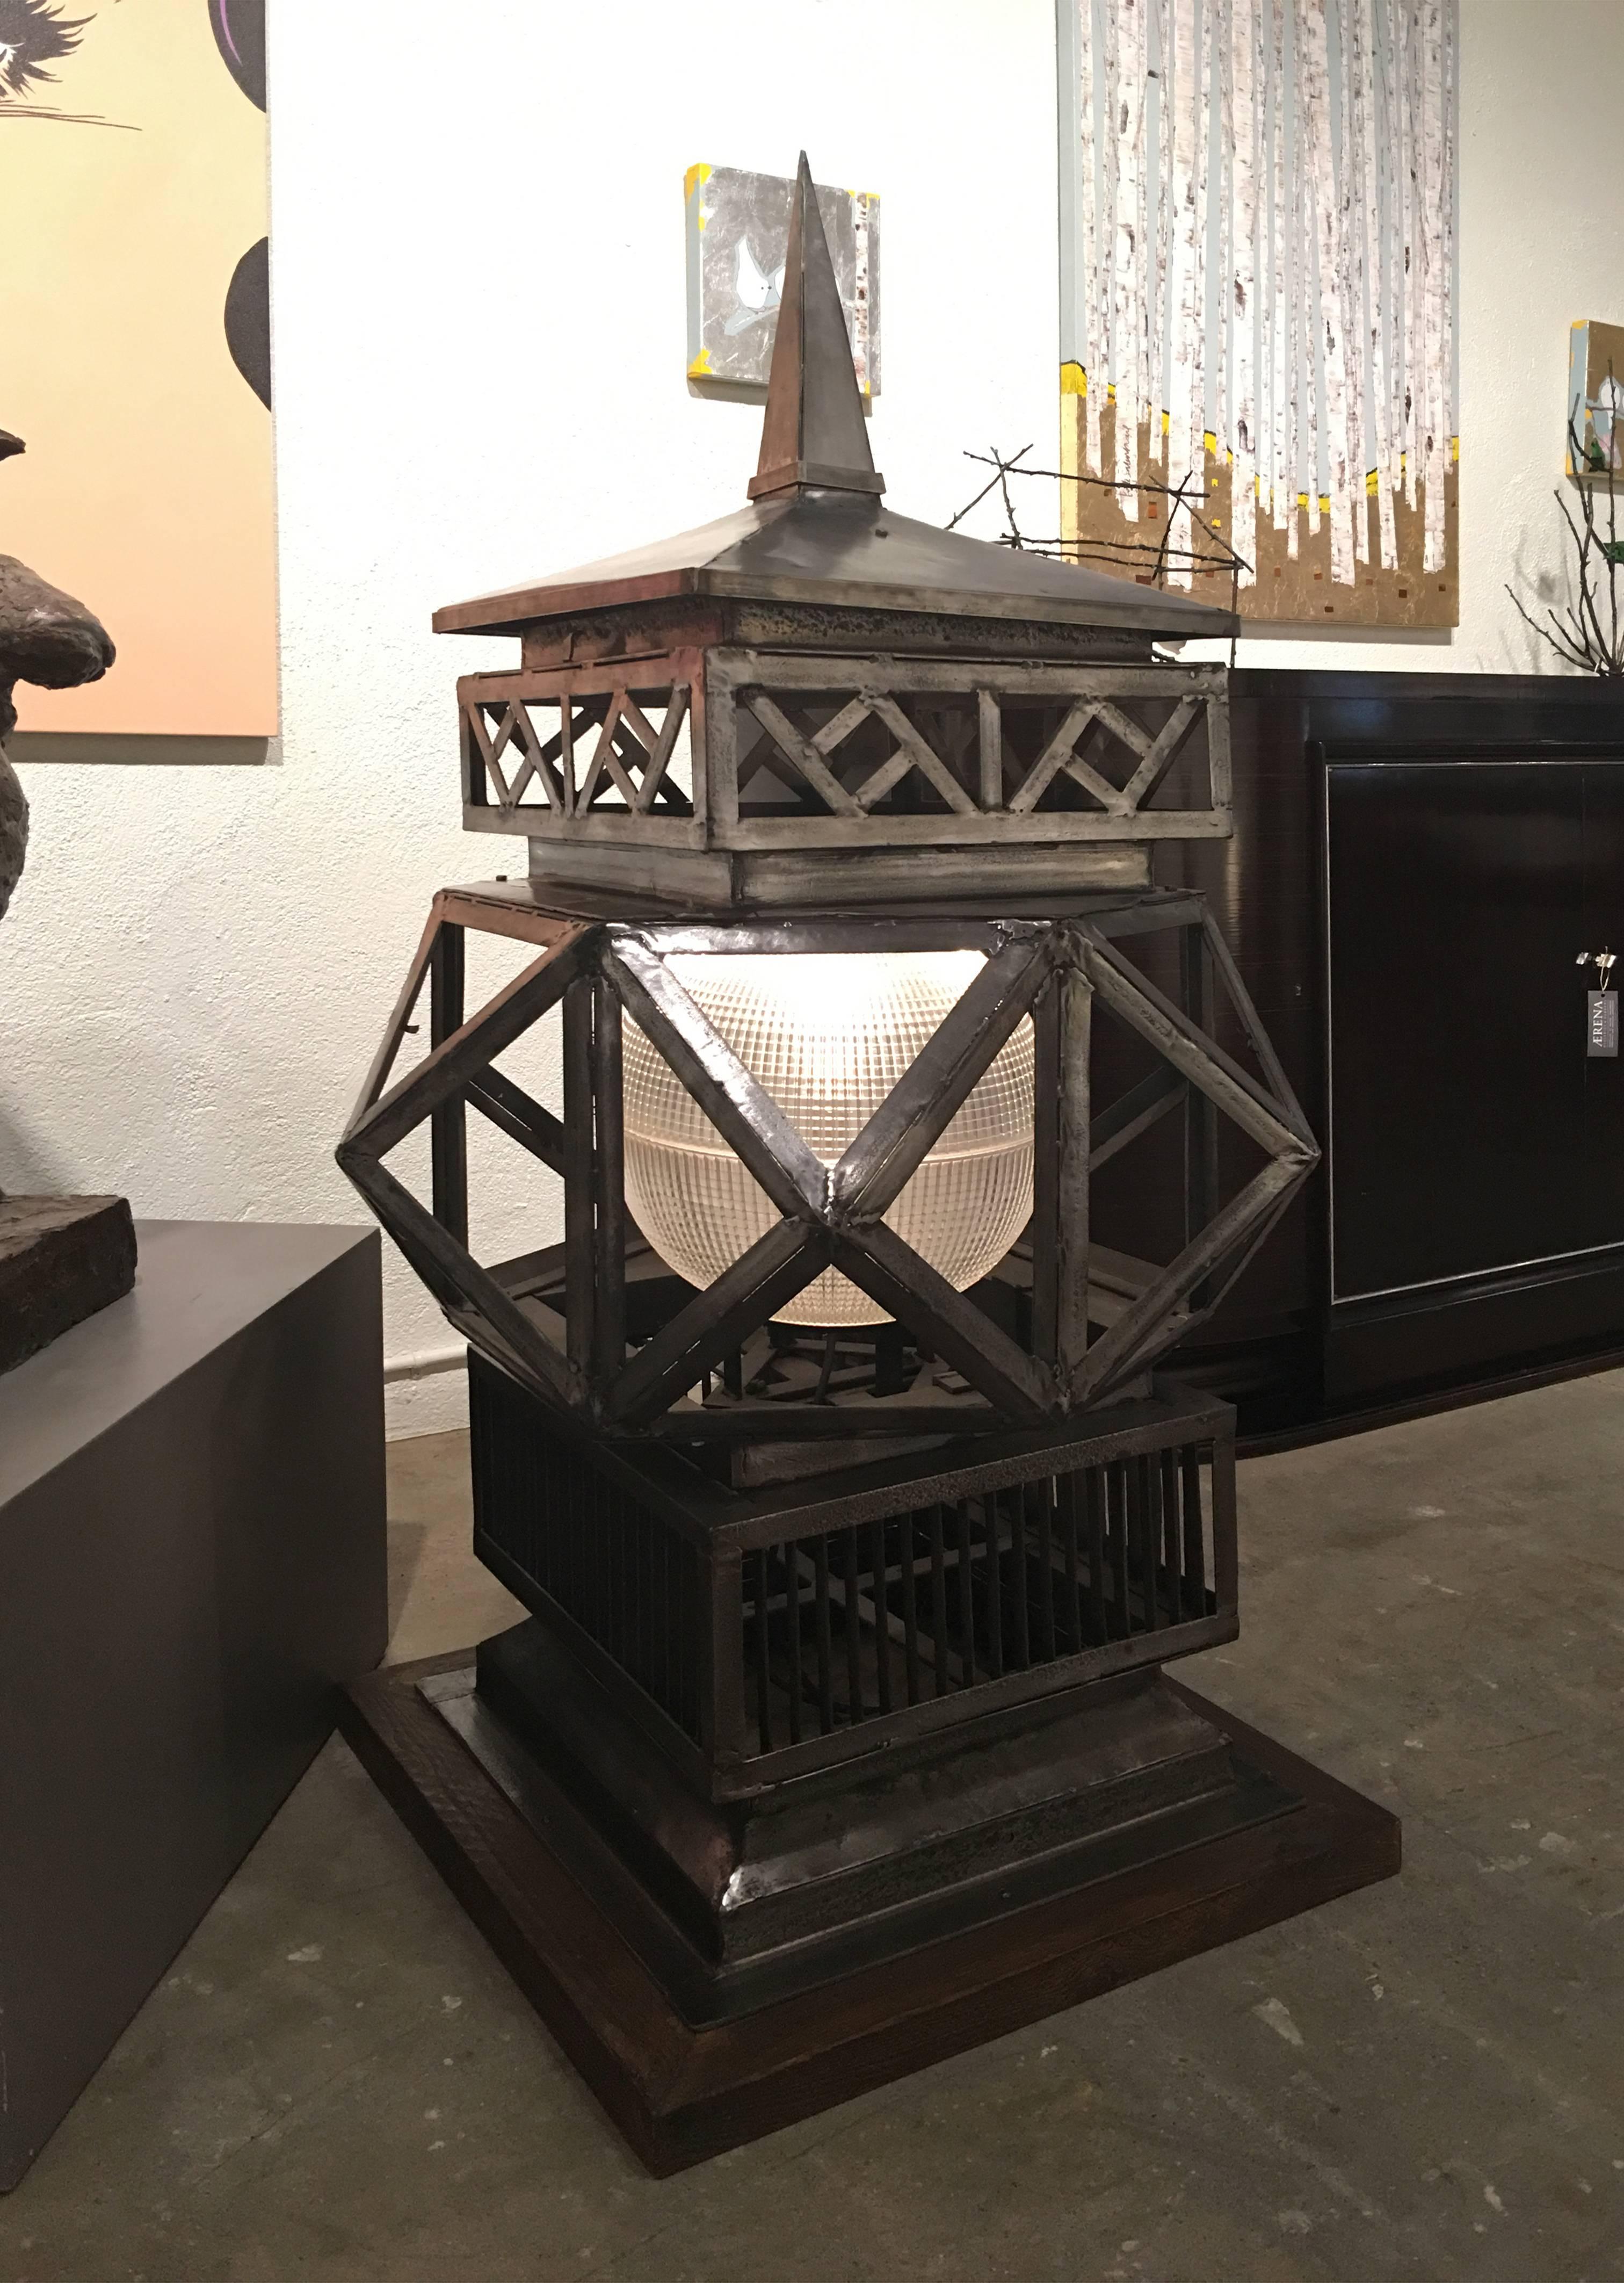 Pair of monumental welded geometric metal lanterns acquired in London. 

Each are welded metal on a wood base; glass lantern orbs were a later addition. Origins unknown; likely plinth lights part of a casino, hotel, or club etc.